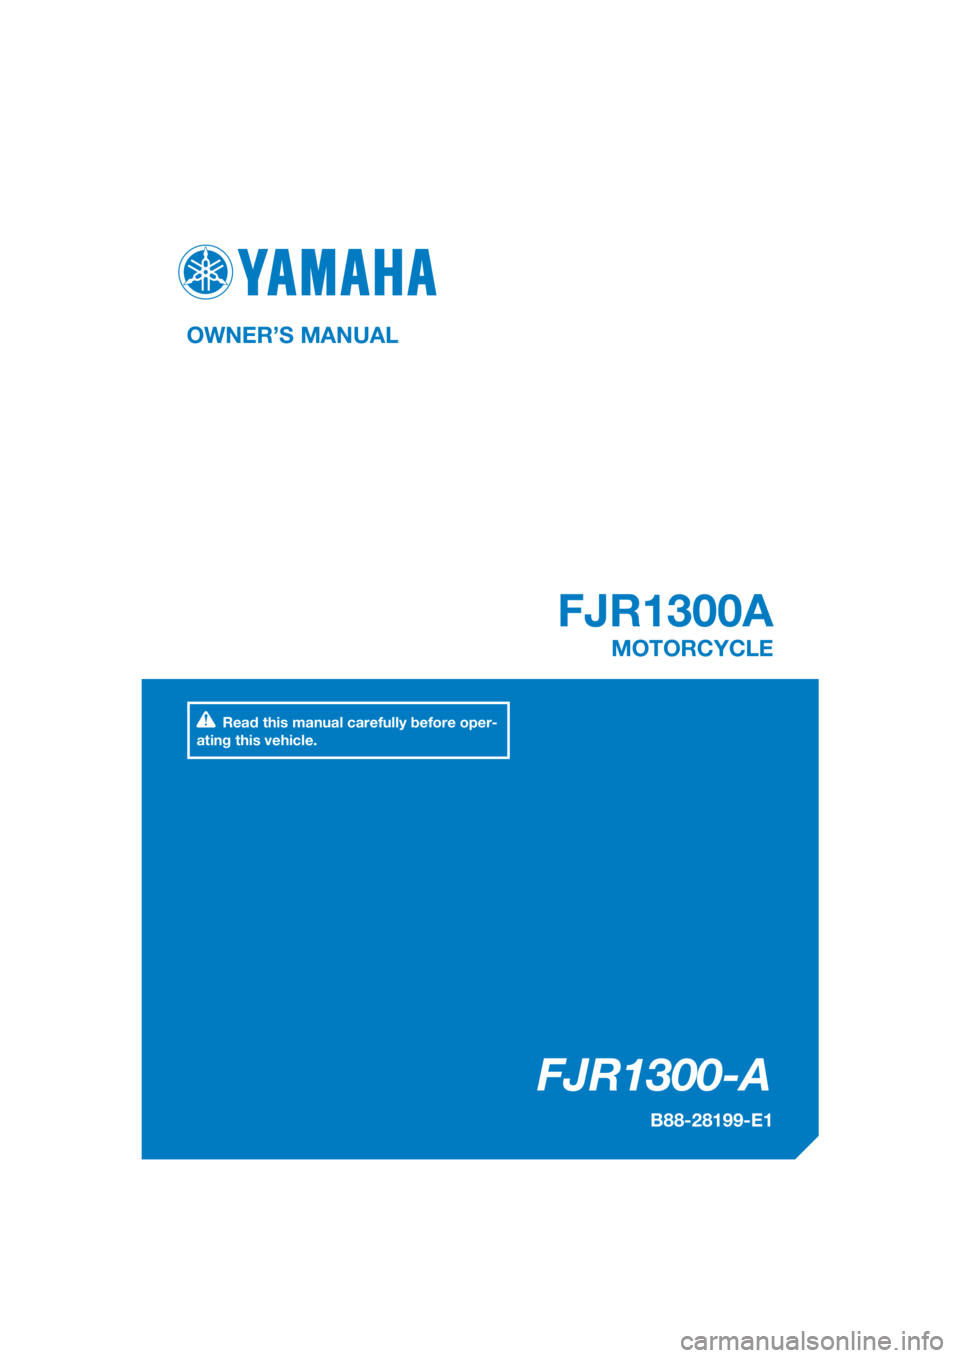 YAMAHA FJR1300A 2018  Owners Manual DIC183
FJR1300-A
FJR1300A
OWNER’S MANUAL
B88-28199-E1
MOTORCYCLE
[English  (E)]
Read this manual carefully before oper-
ating this vehicle. 